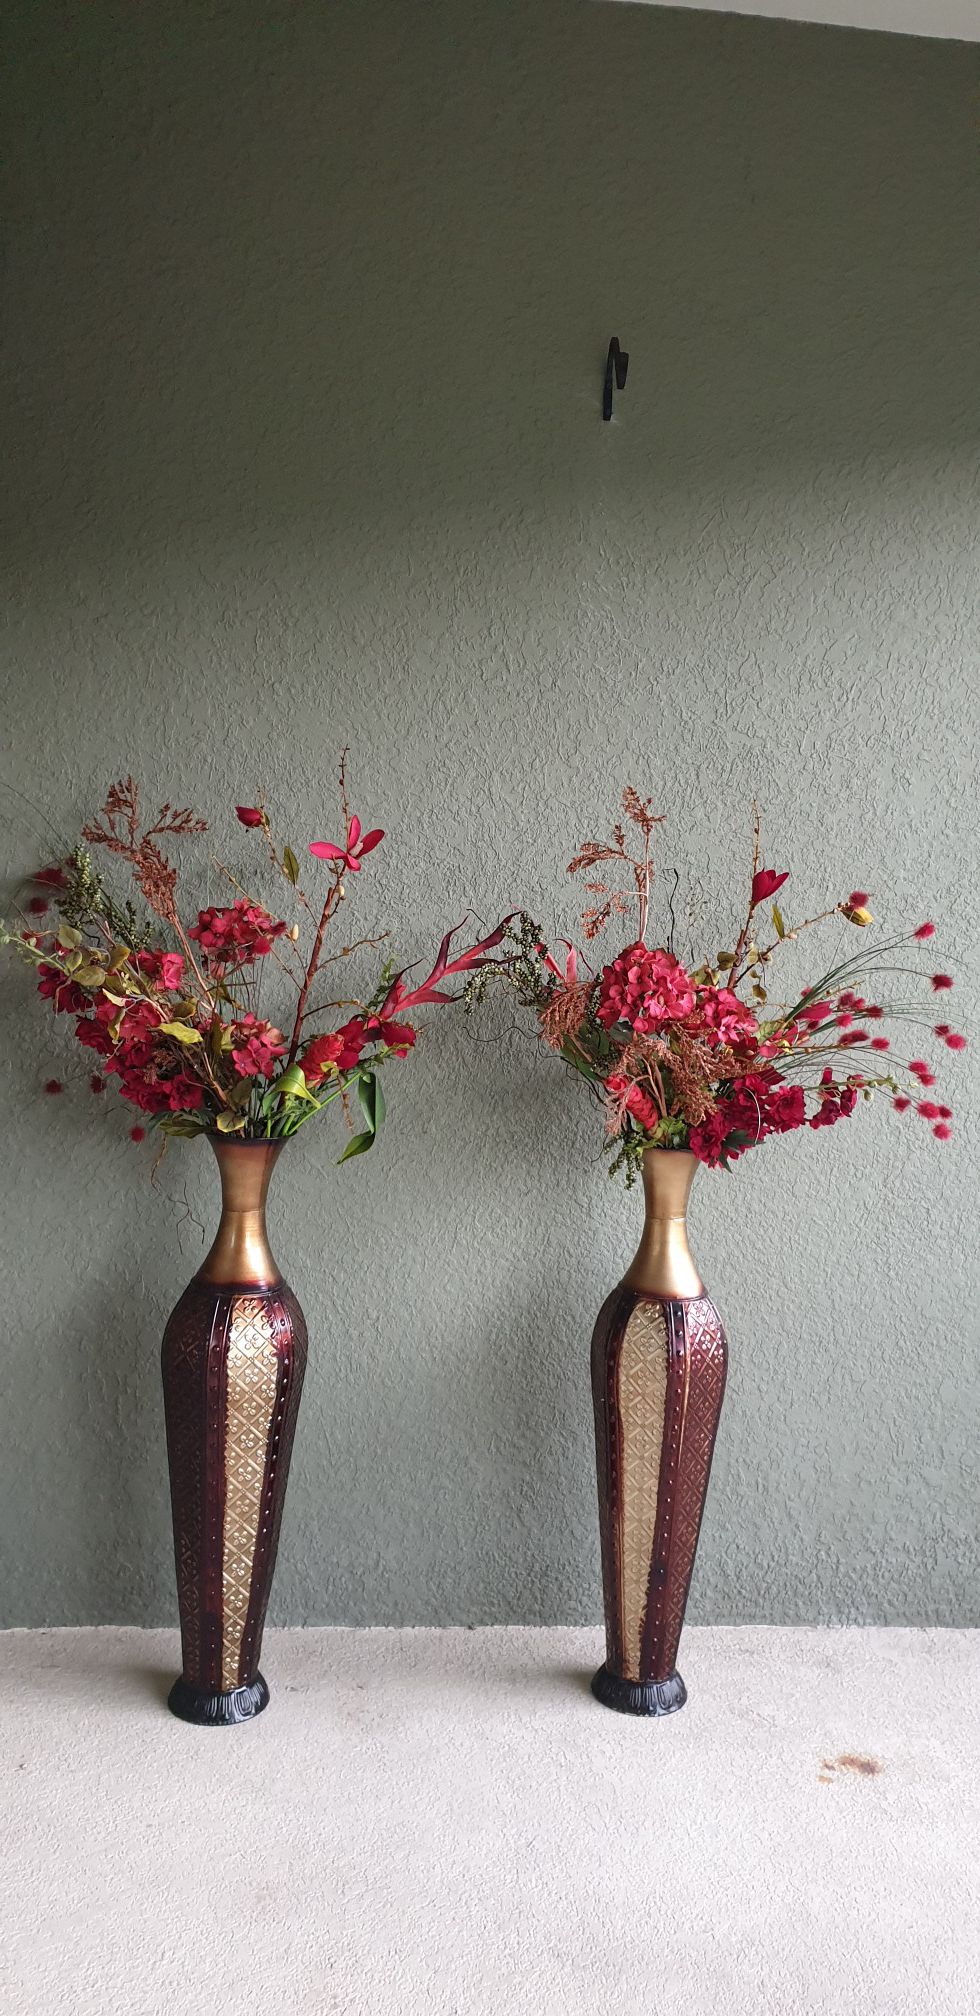 Two decorating vases with flowers